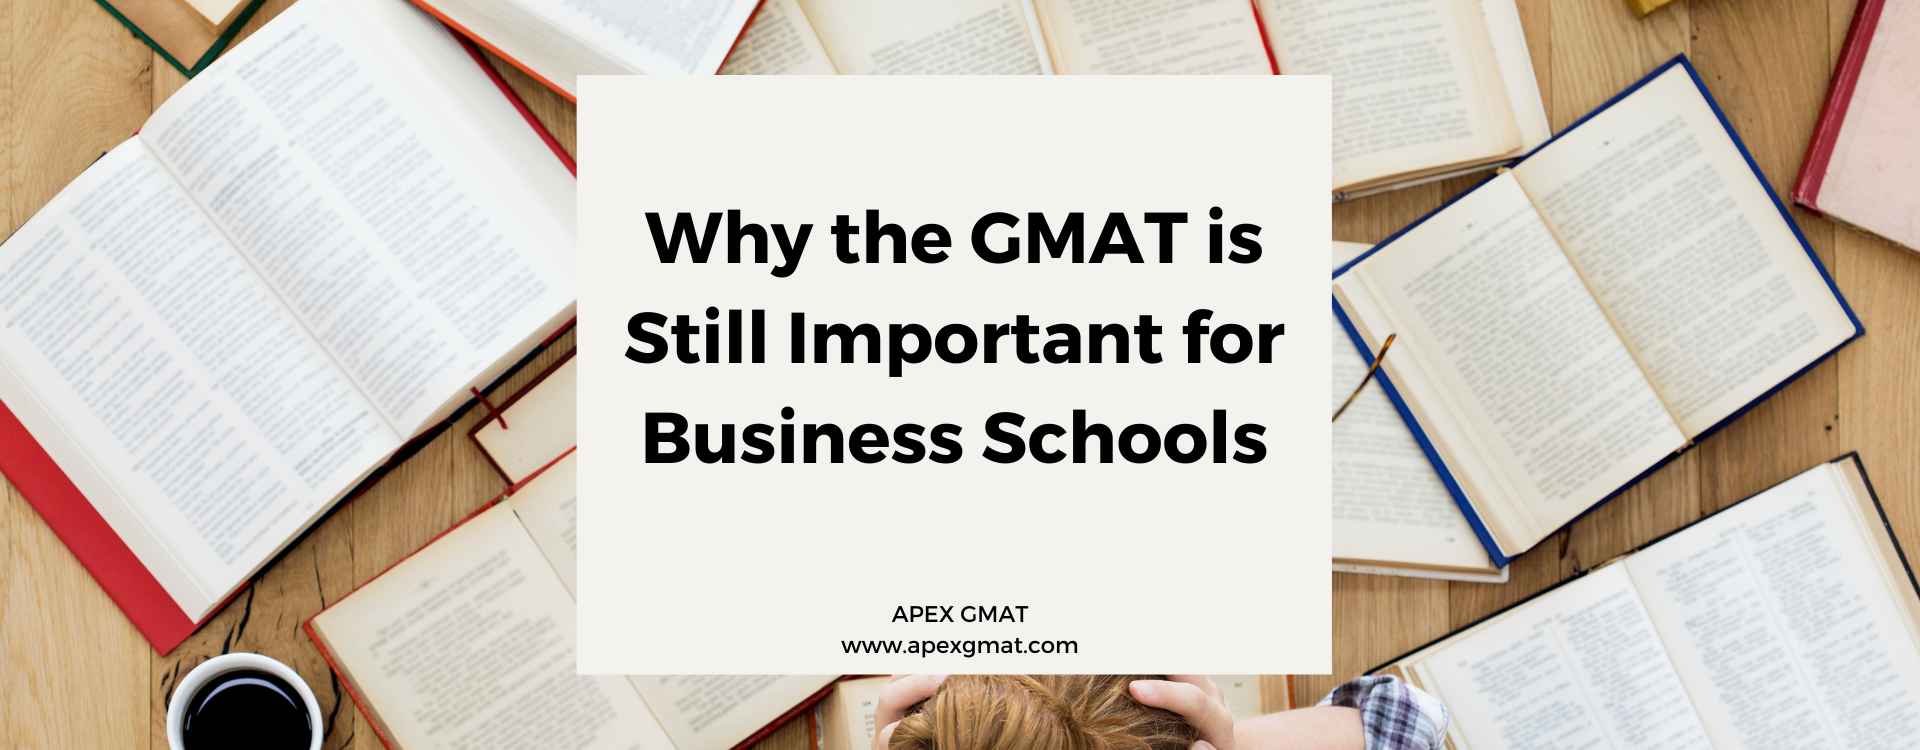 Why the GMAT Focus is Still Important for Business Schools